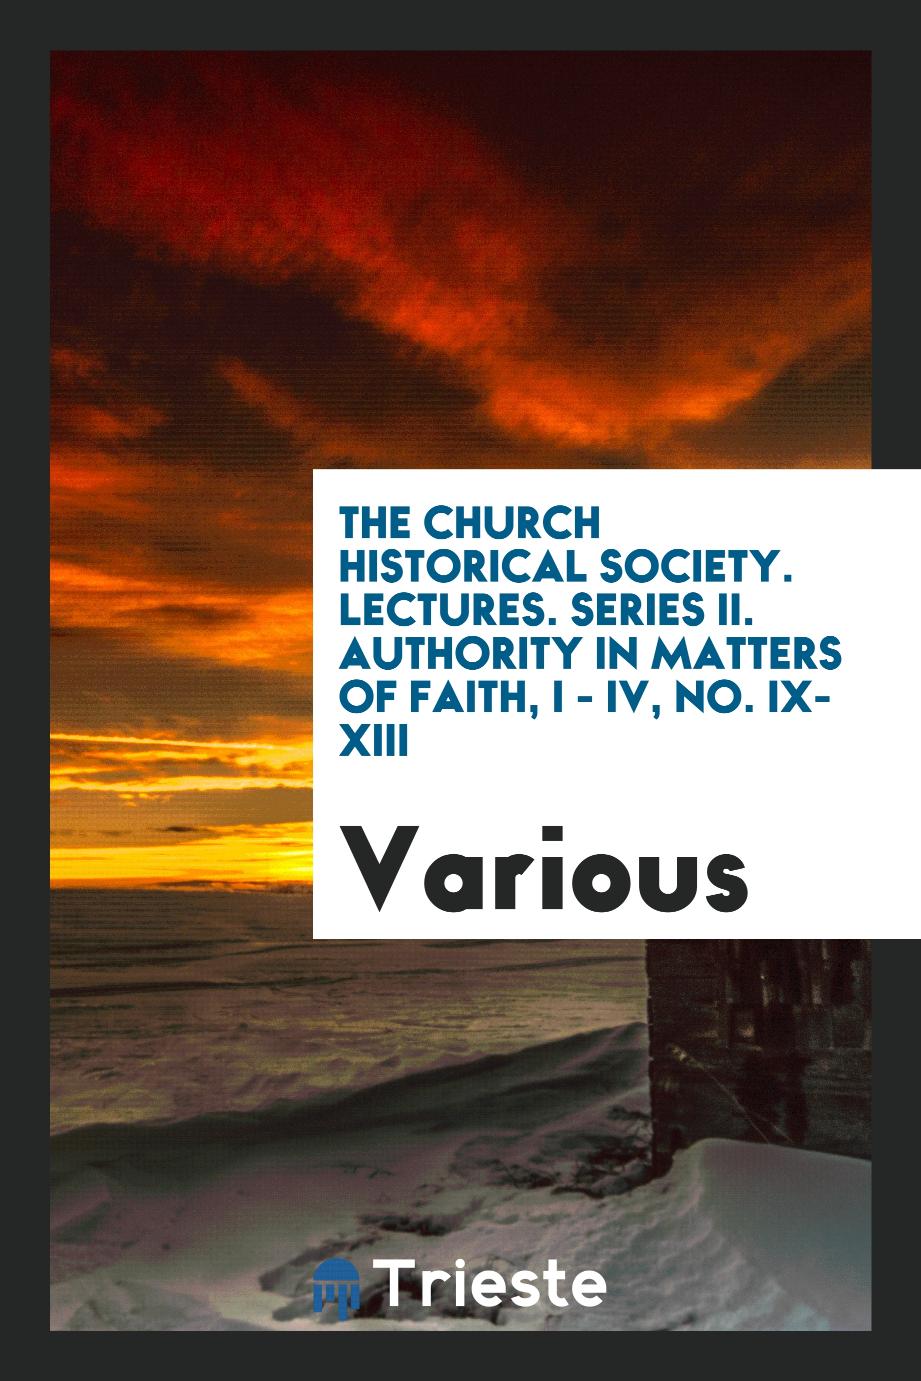 The church historical society. Lectures. Series II. Authority in matters of faith, I - IV, No. IX- XIII